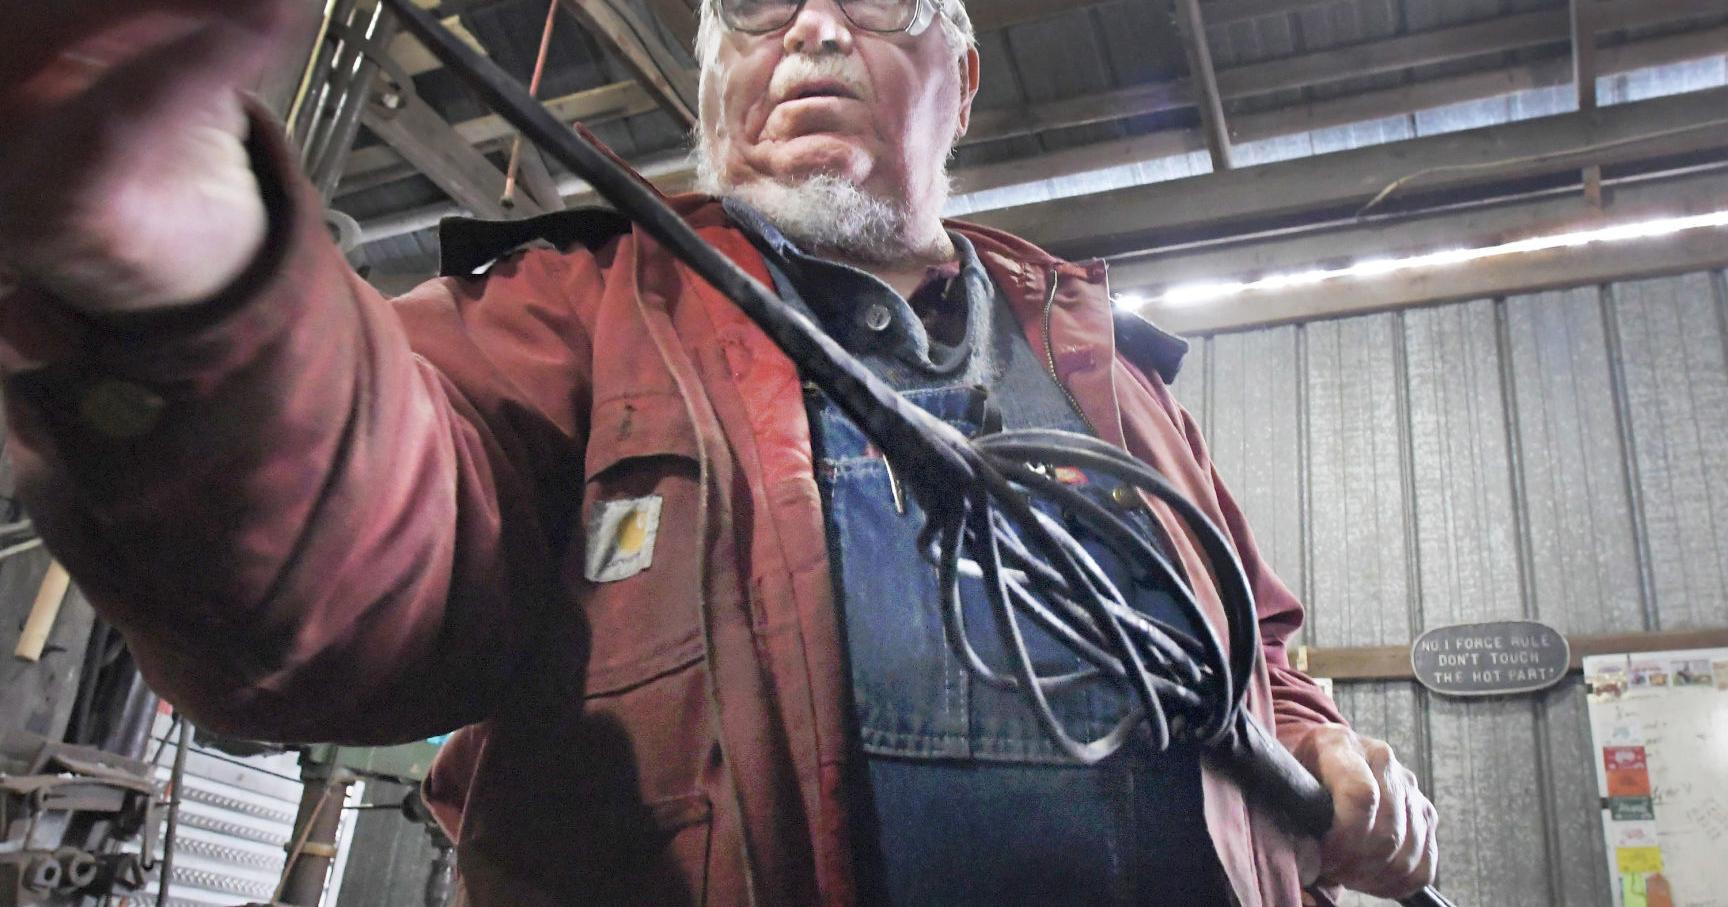 Watch now: These Central Illinois blacksmiths keep tradition alive